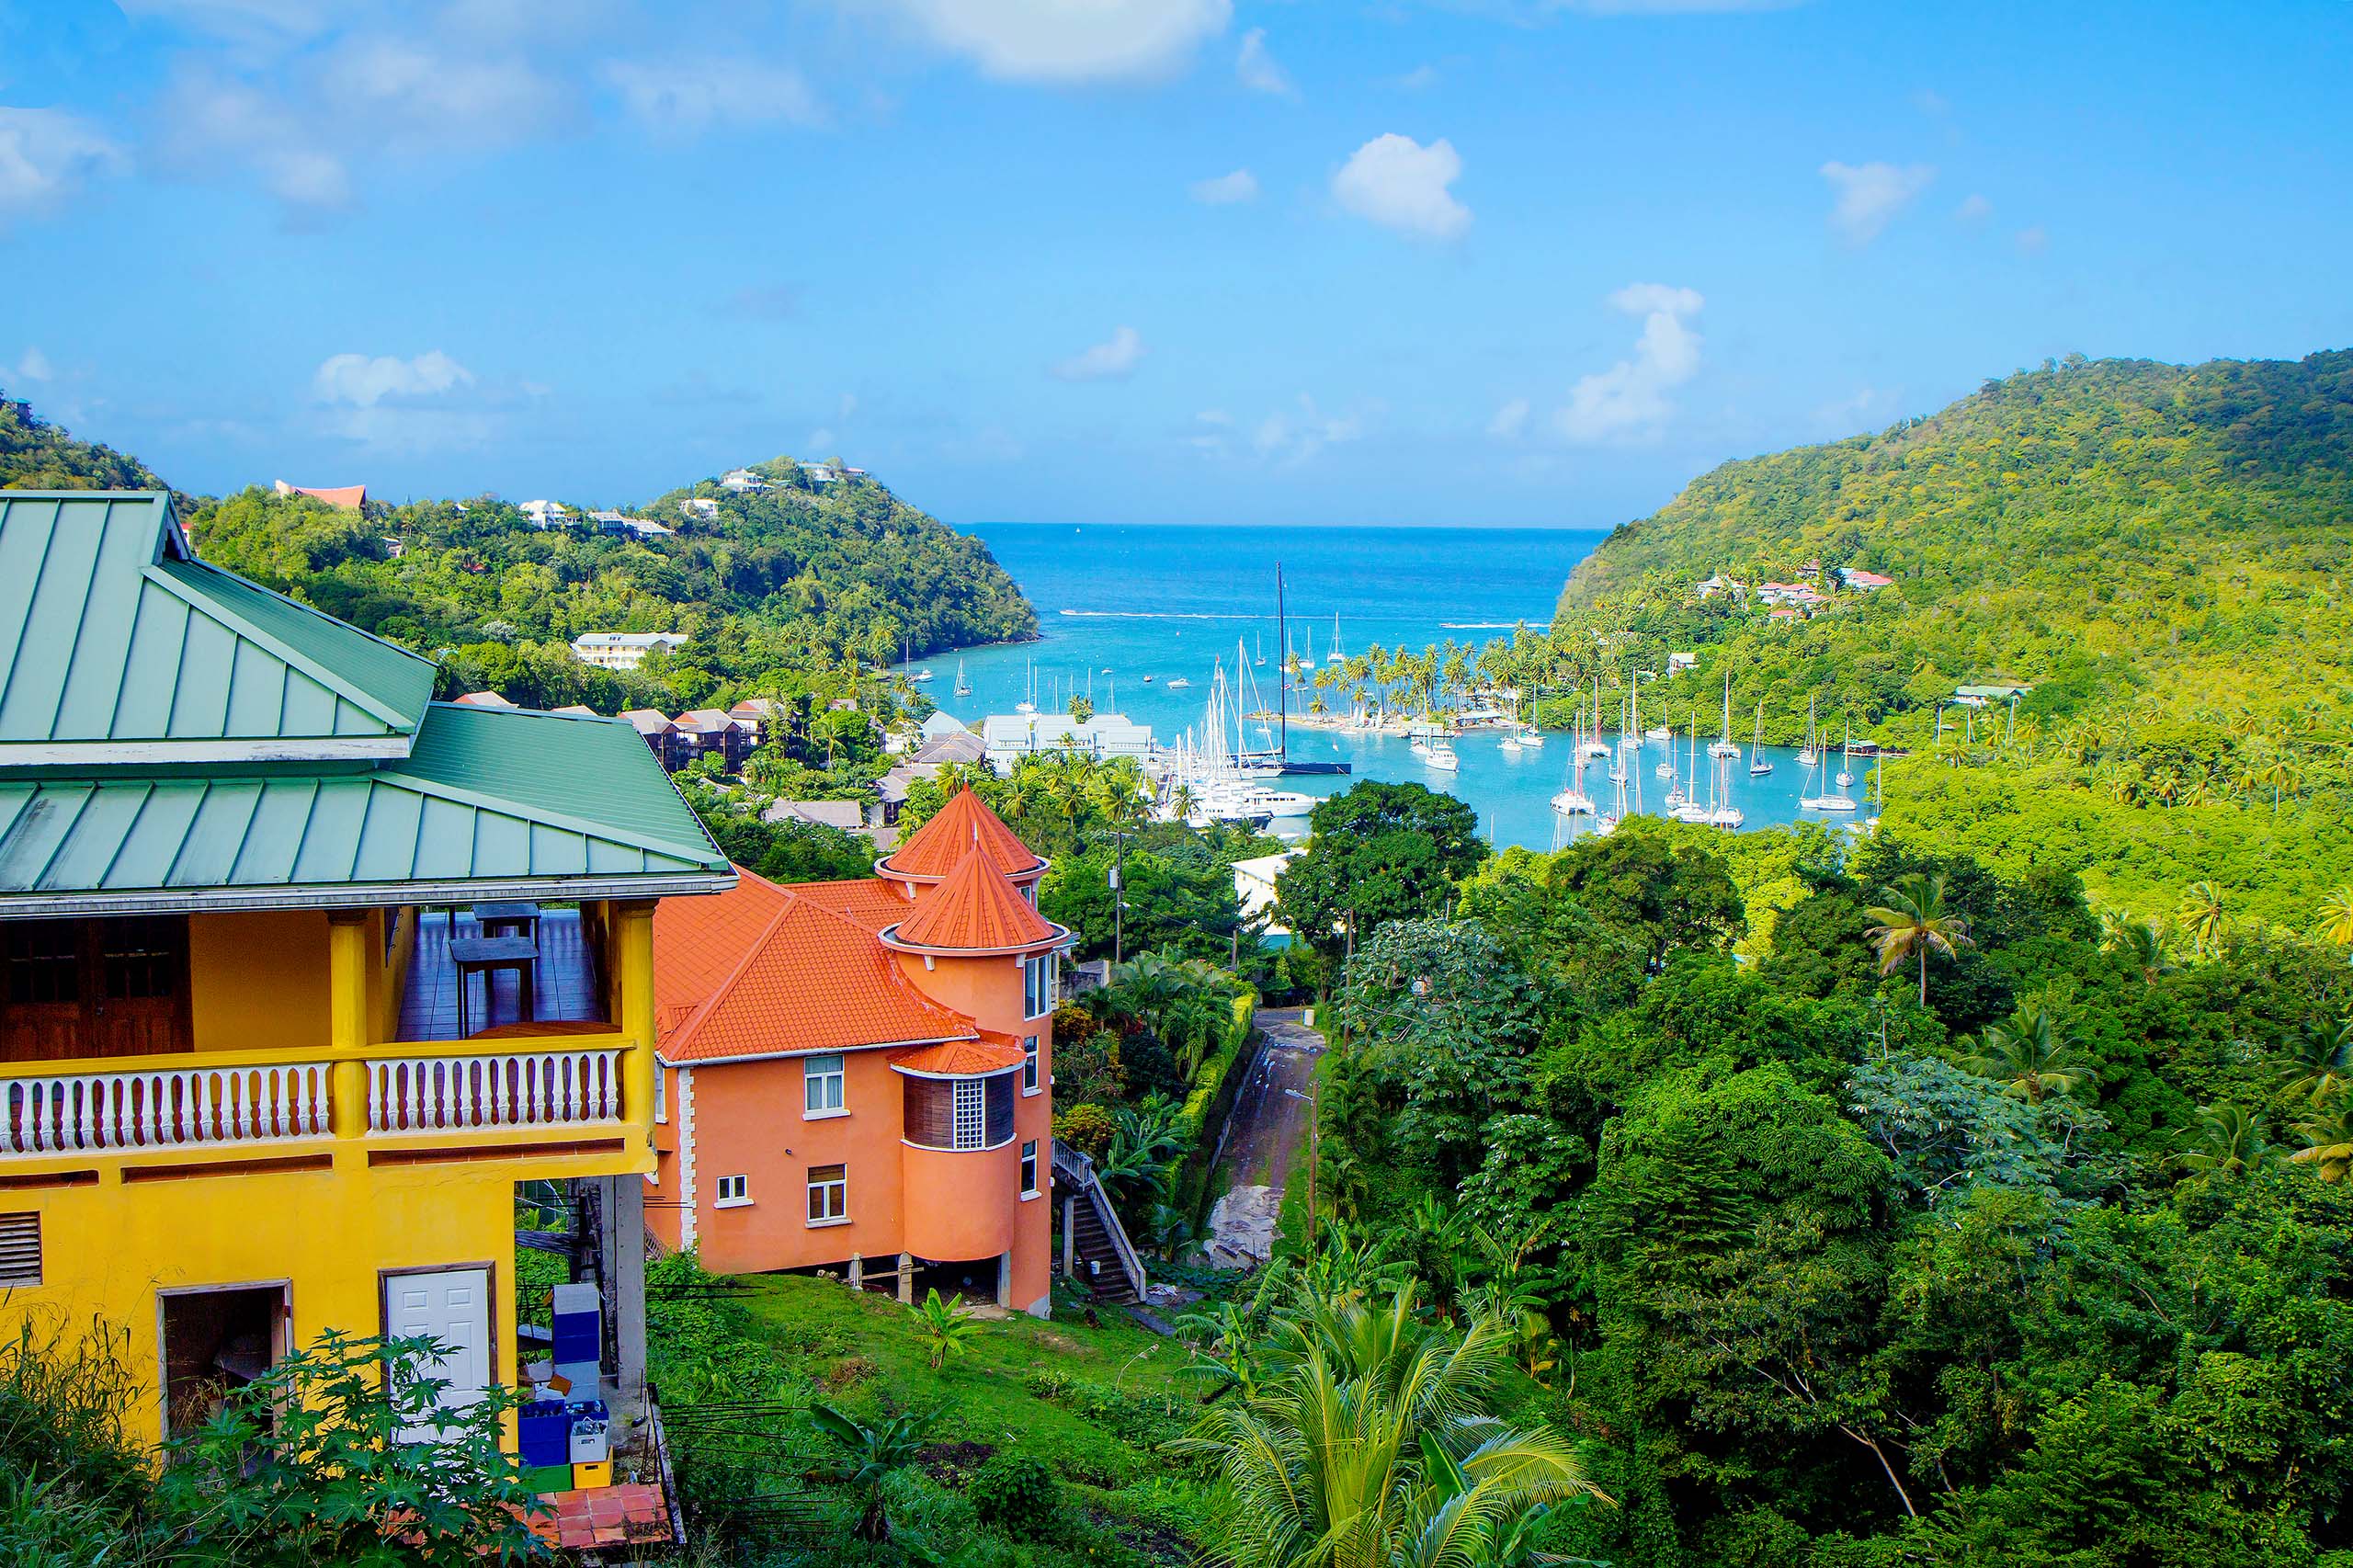 The Caribbean. The Island Of St Lucia. St. Lucia is considered the most beautiful island in the Caribbean sea. On the island the best beaches in the Caribbean.